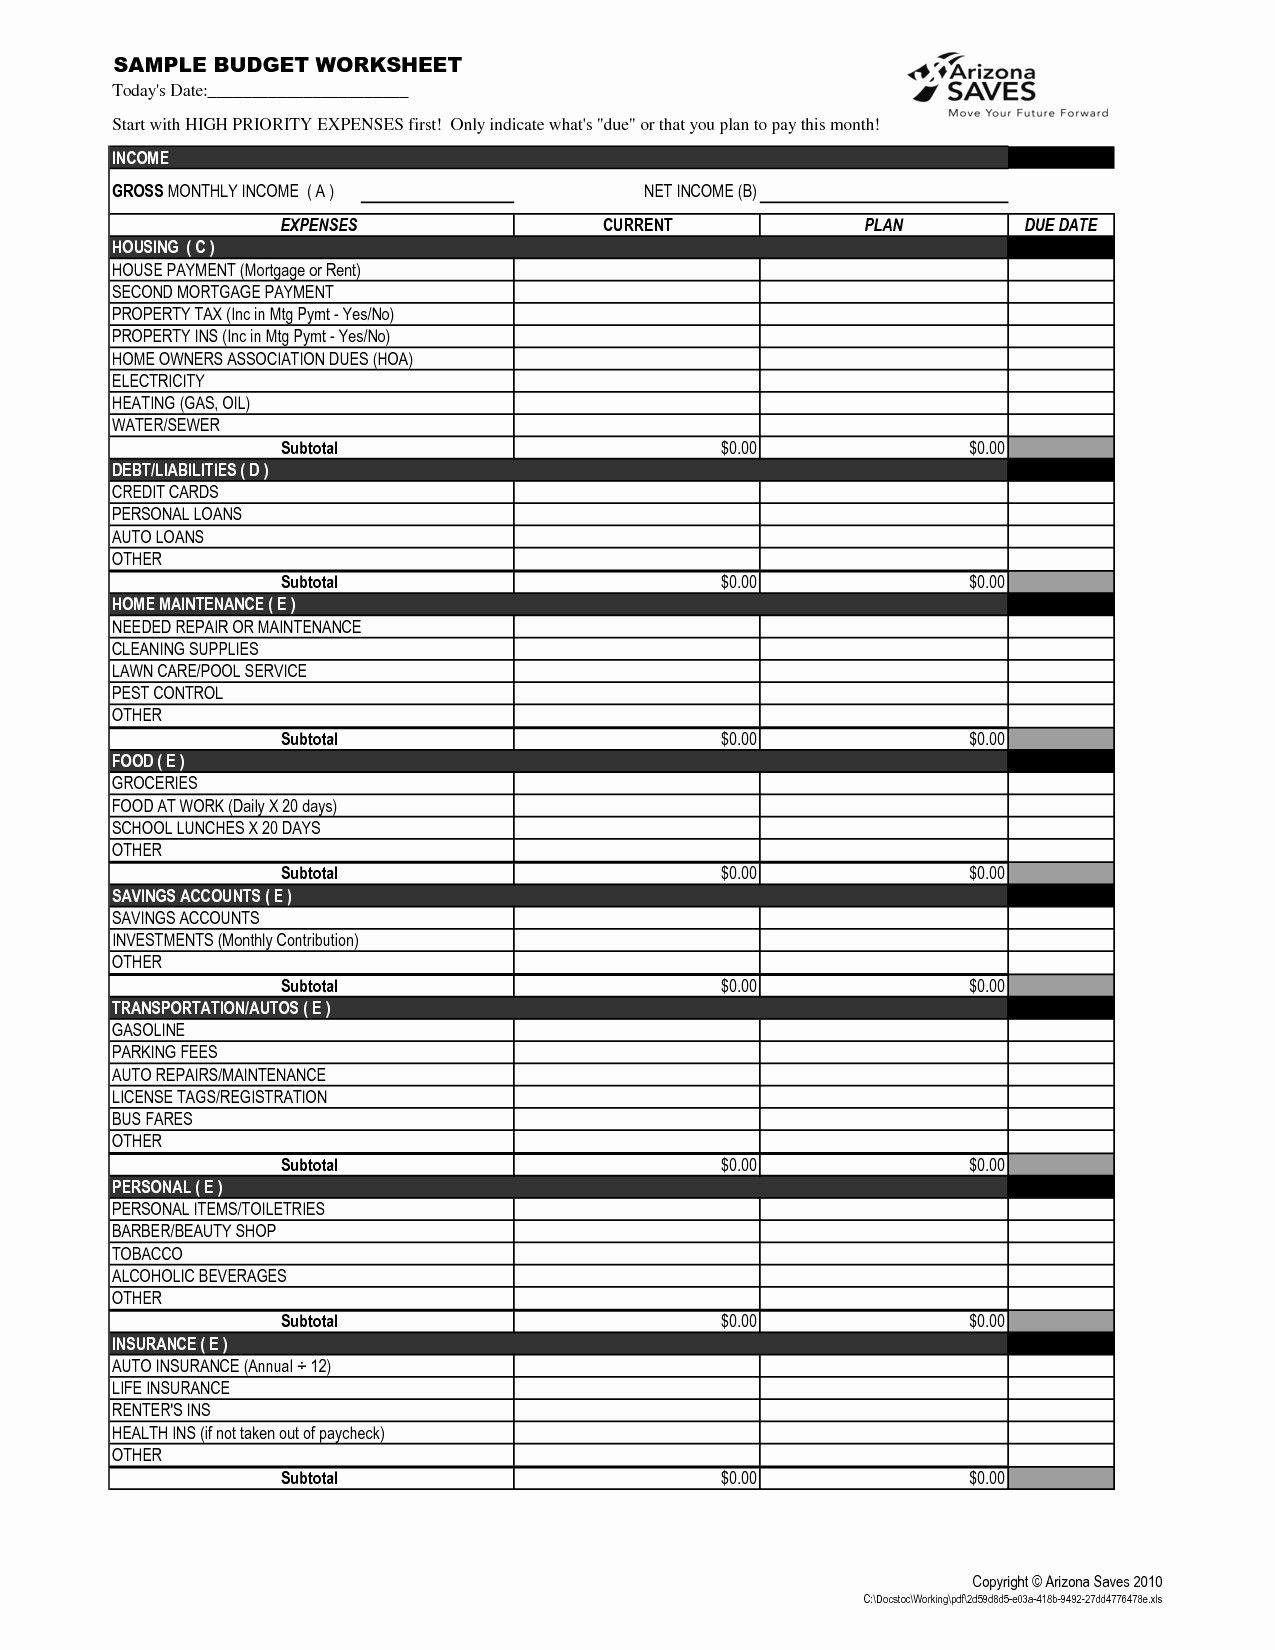 Budgeting Worksheet for College Students Awesome Collection Of Sample Bud Worksheet for High School